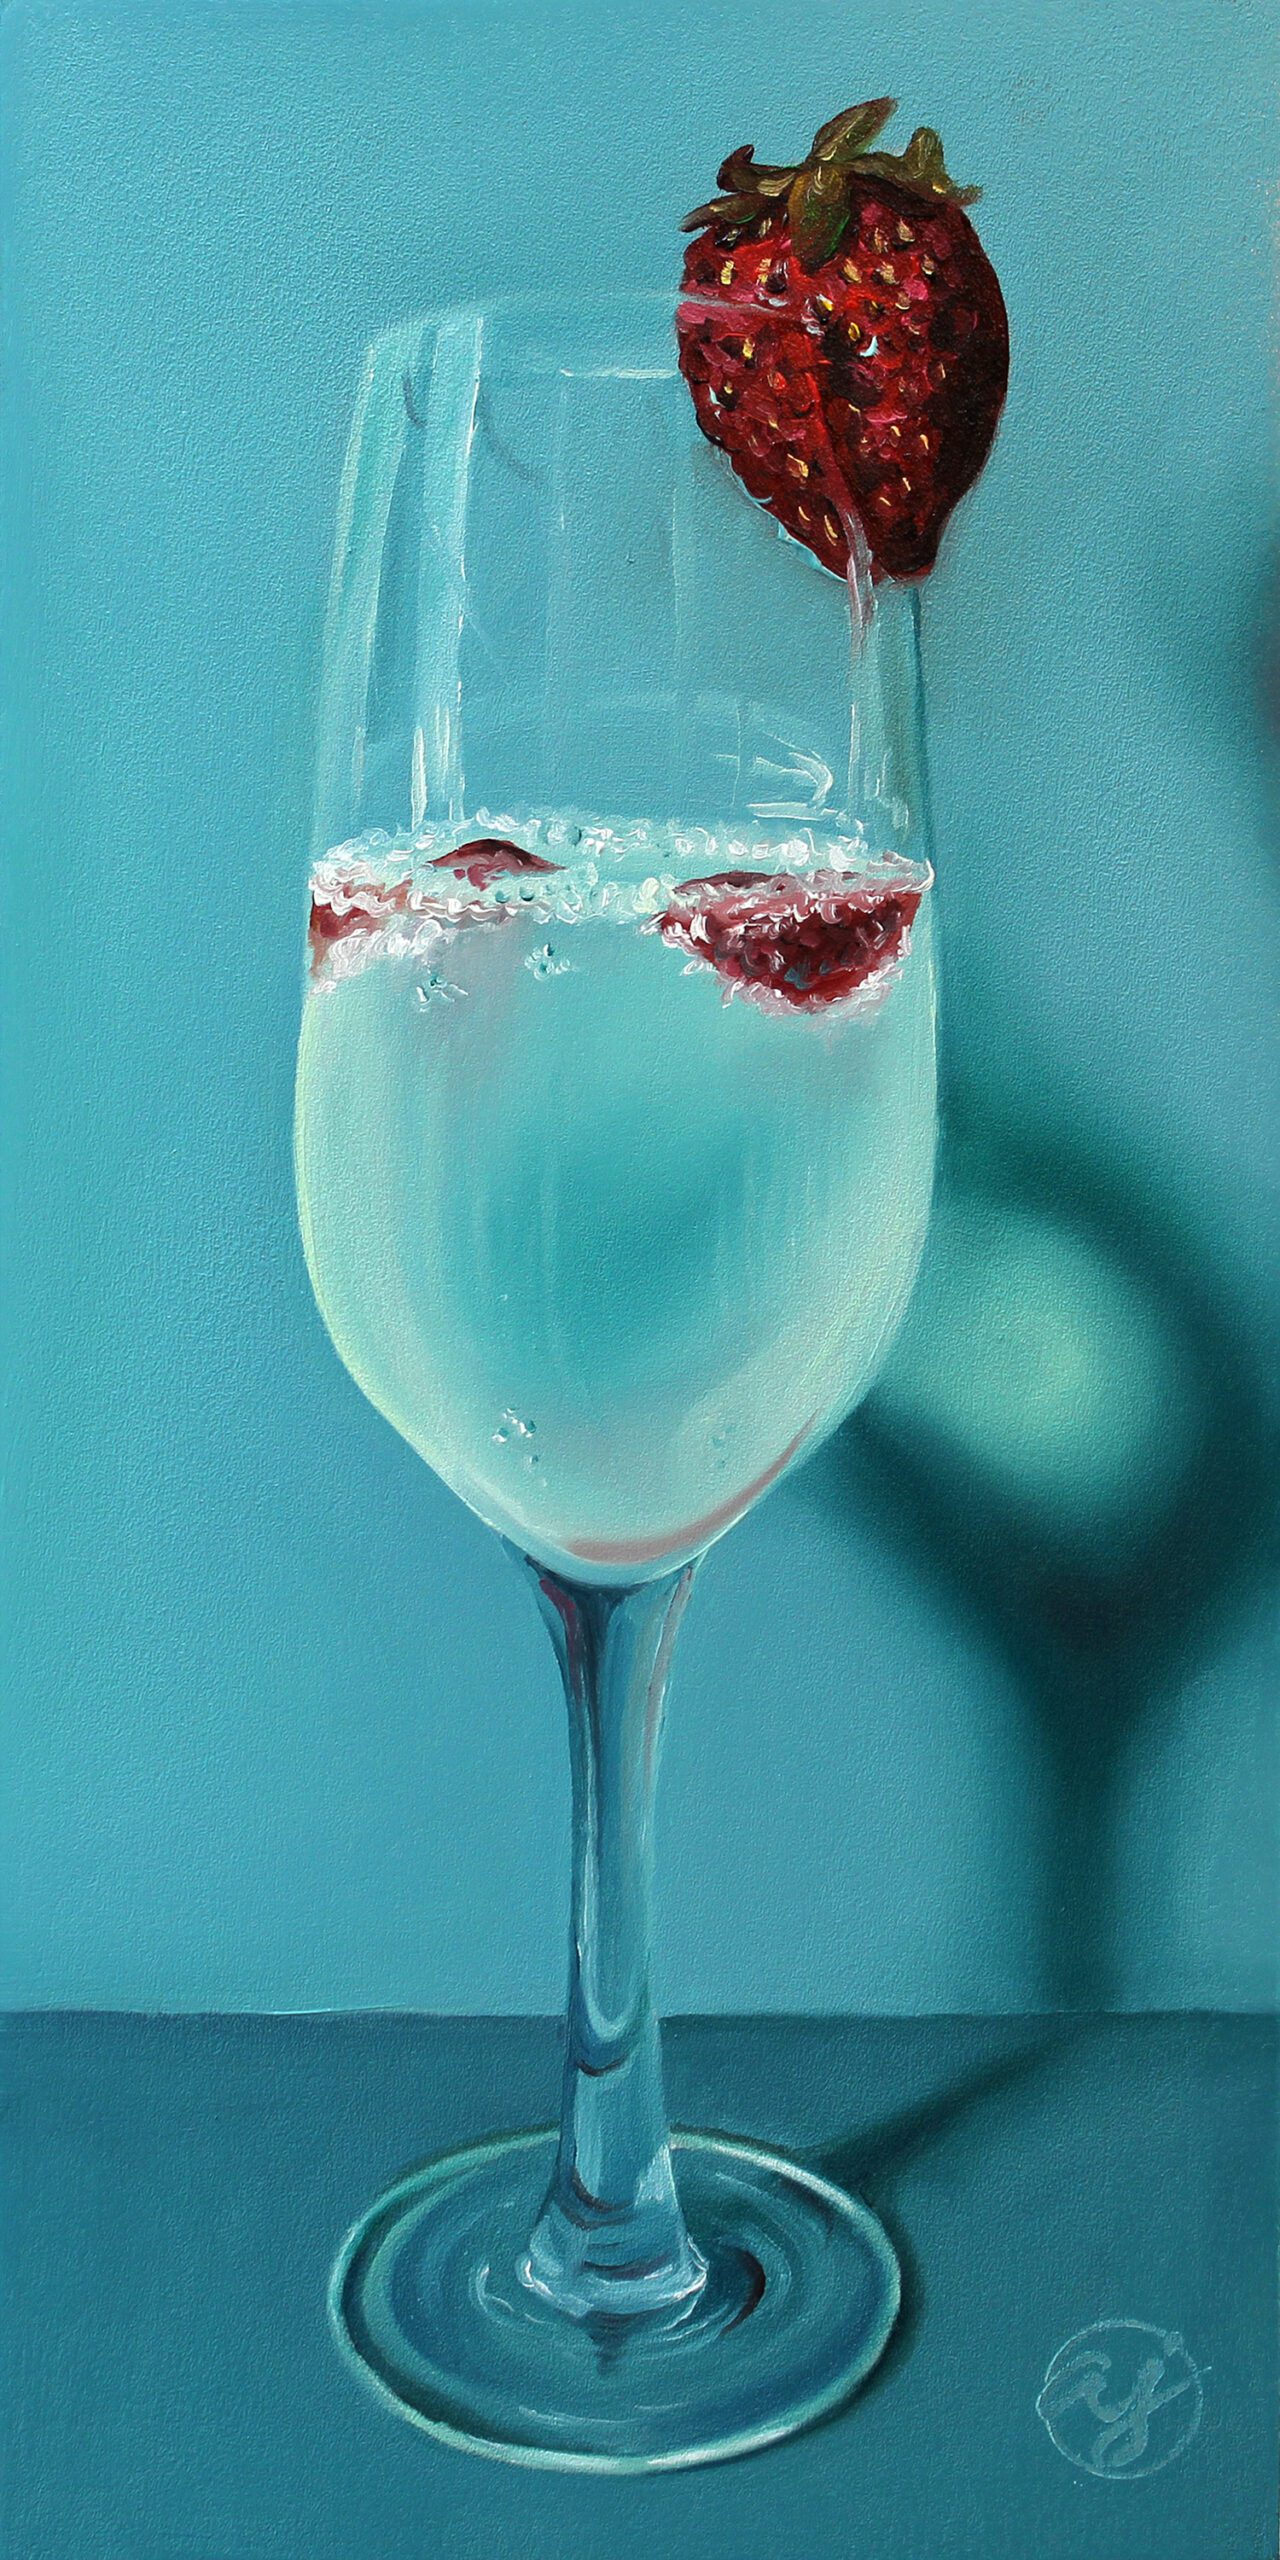 "Prosecco & Strawberries" 6x12 Original Oil Painting by Abra Johnson